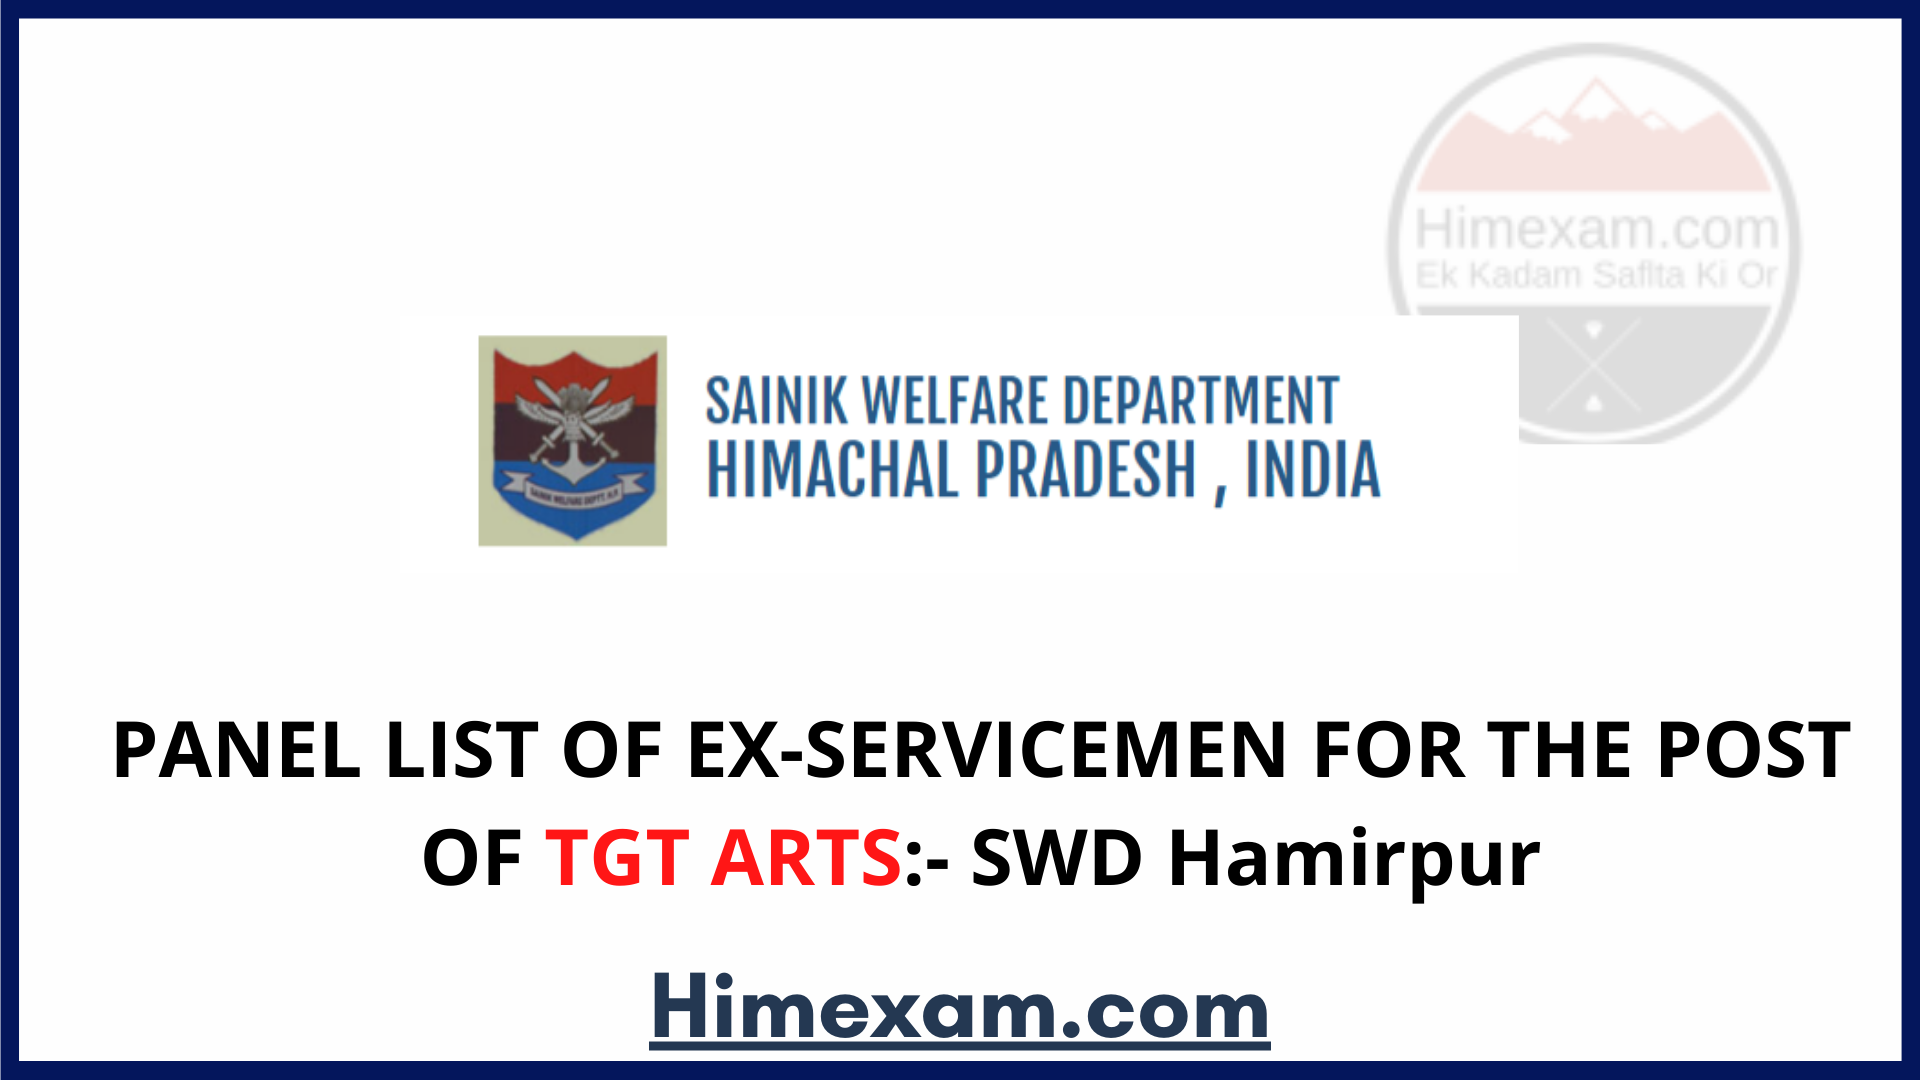 PANEL LIST OF EX-SERVICEMEN FOR THE POST OF TGT ARTS:- SWD Hamirpur